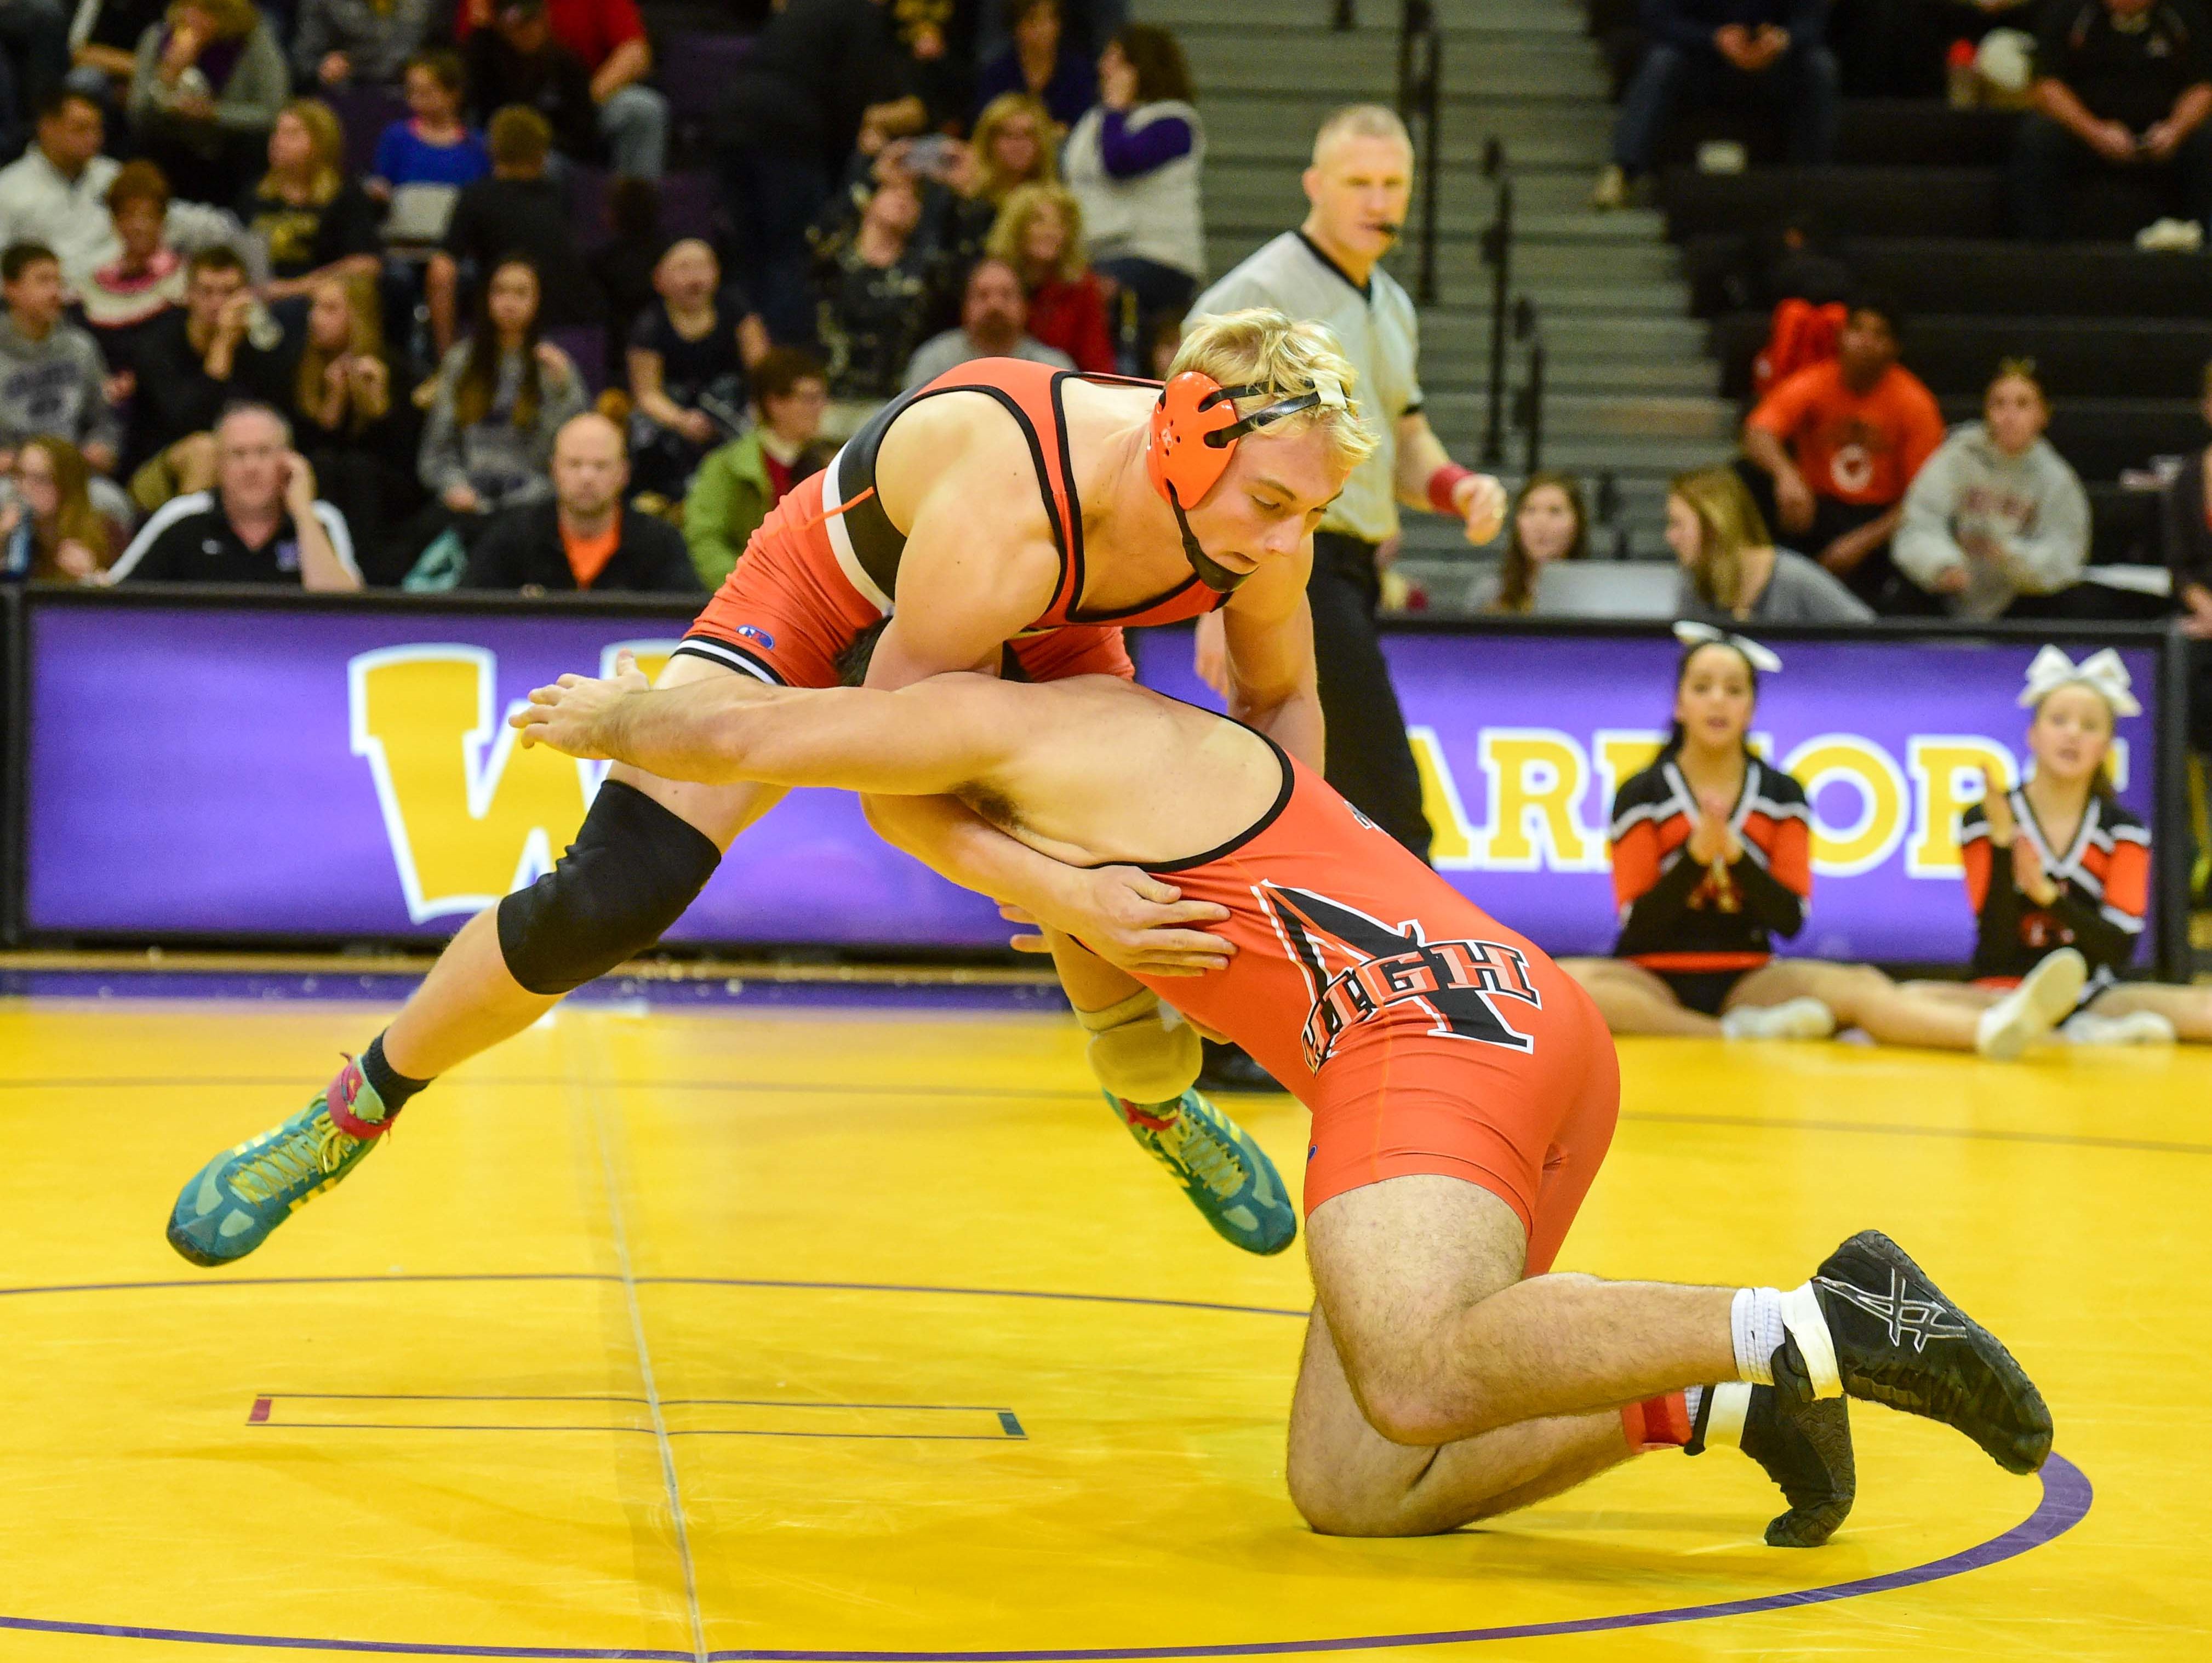 At 220lbs Valley's Rocky Lombardi sprawls as Ames' Harrison Townsend shoots in for a takedown on Thursday, December 10, 2015, during a wrestling meet held at Waukee High School.